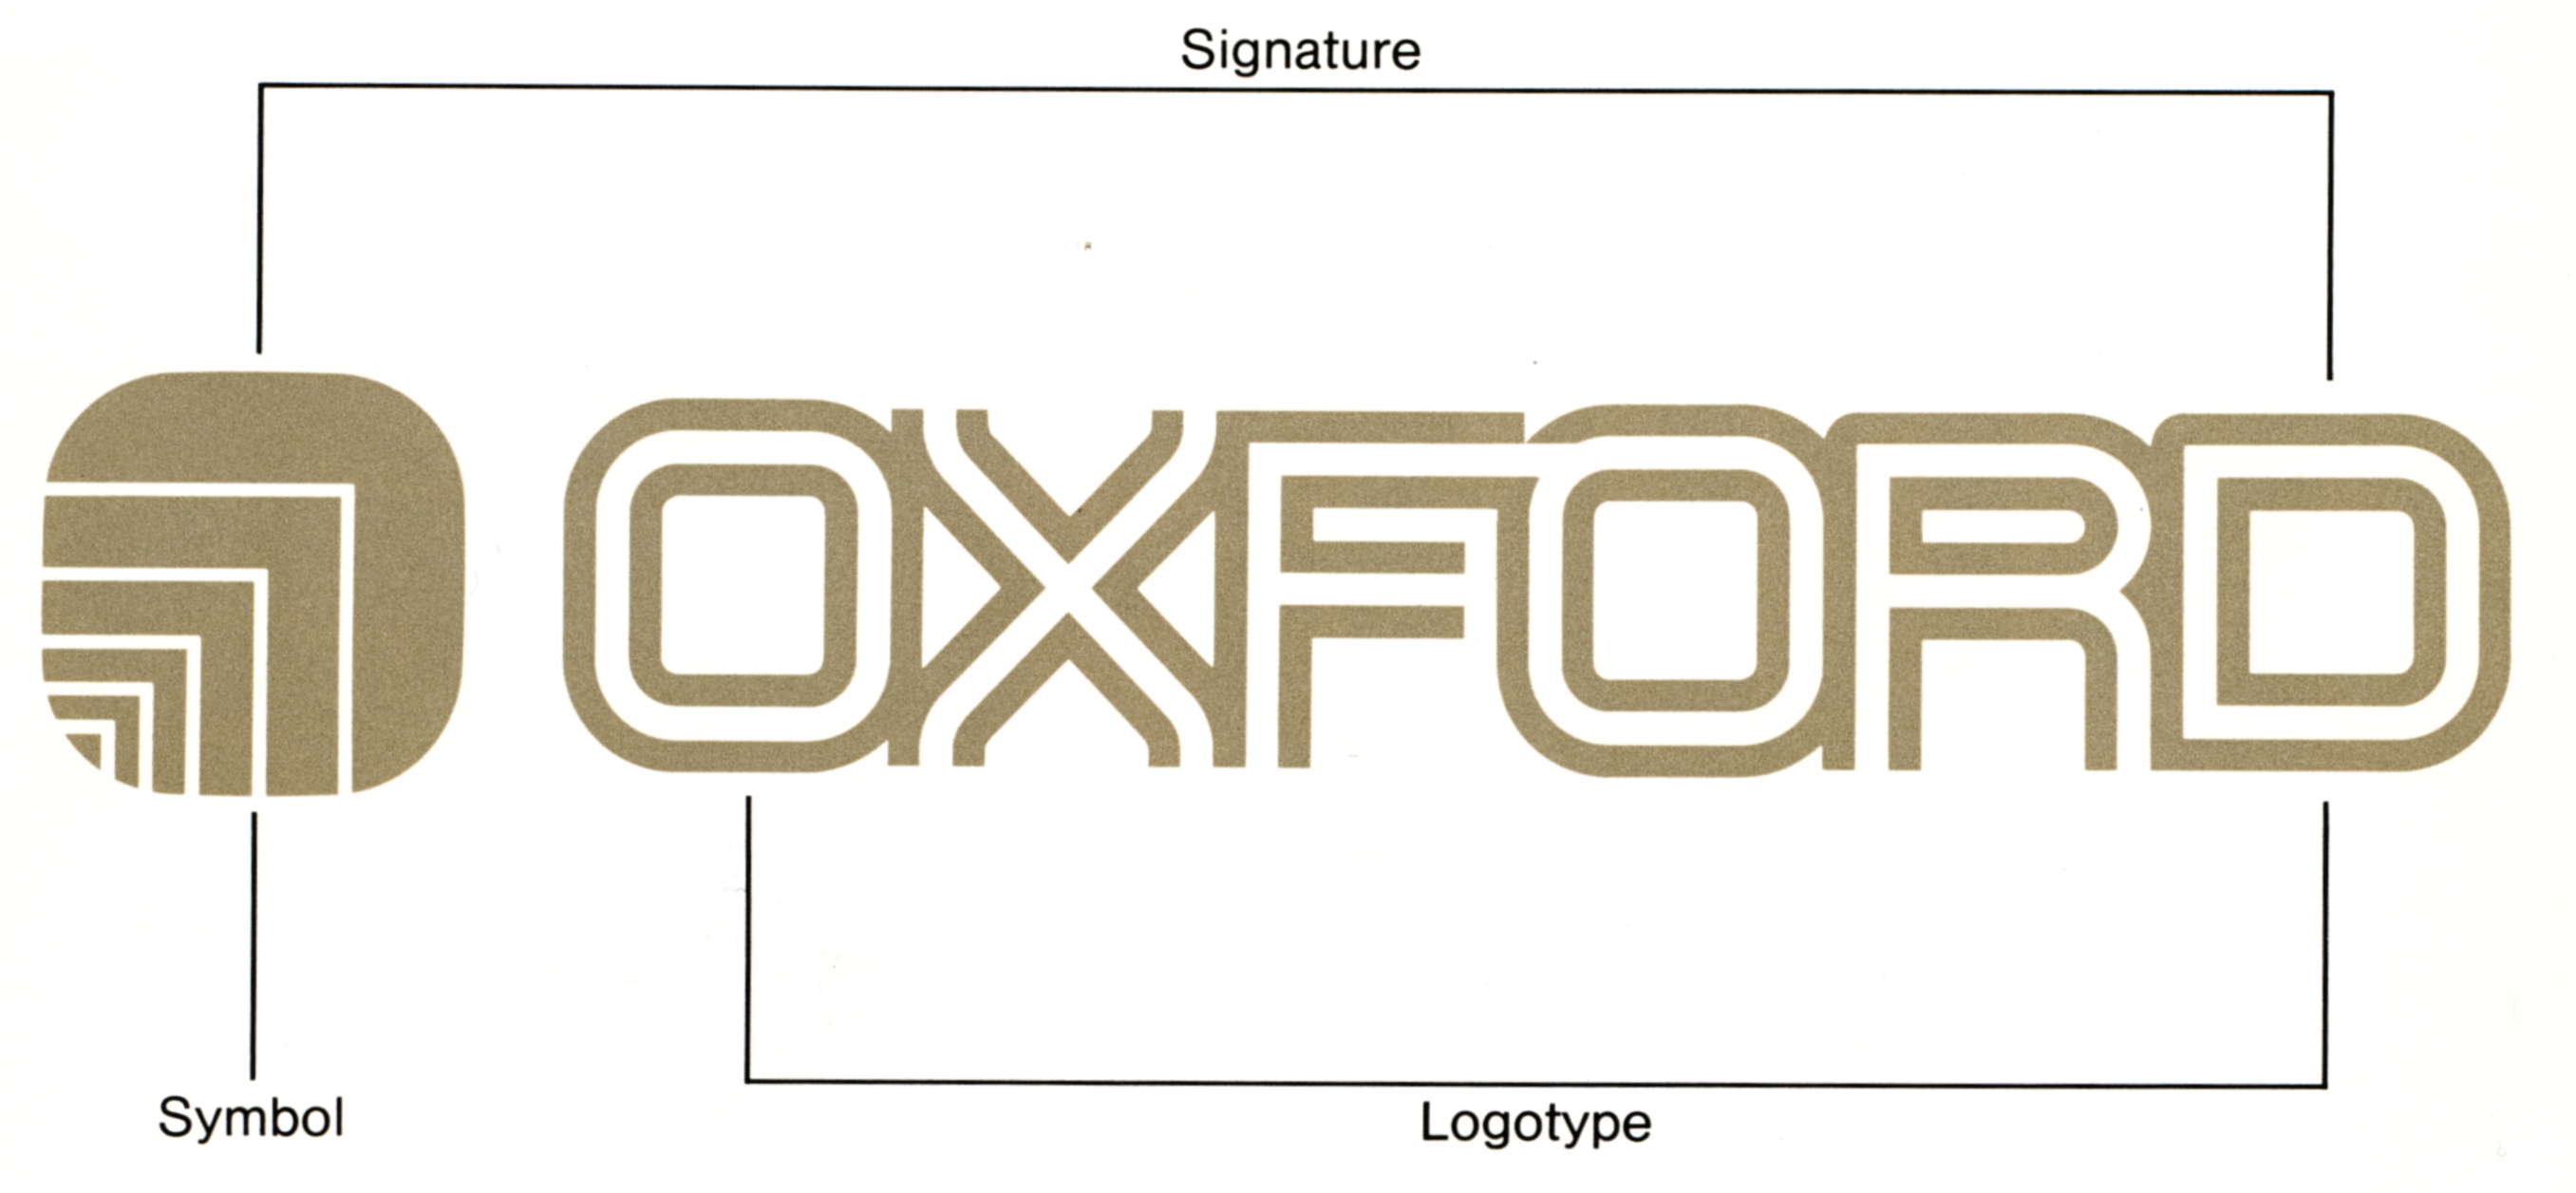 Logo and signature with details of its construction.